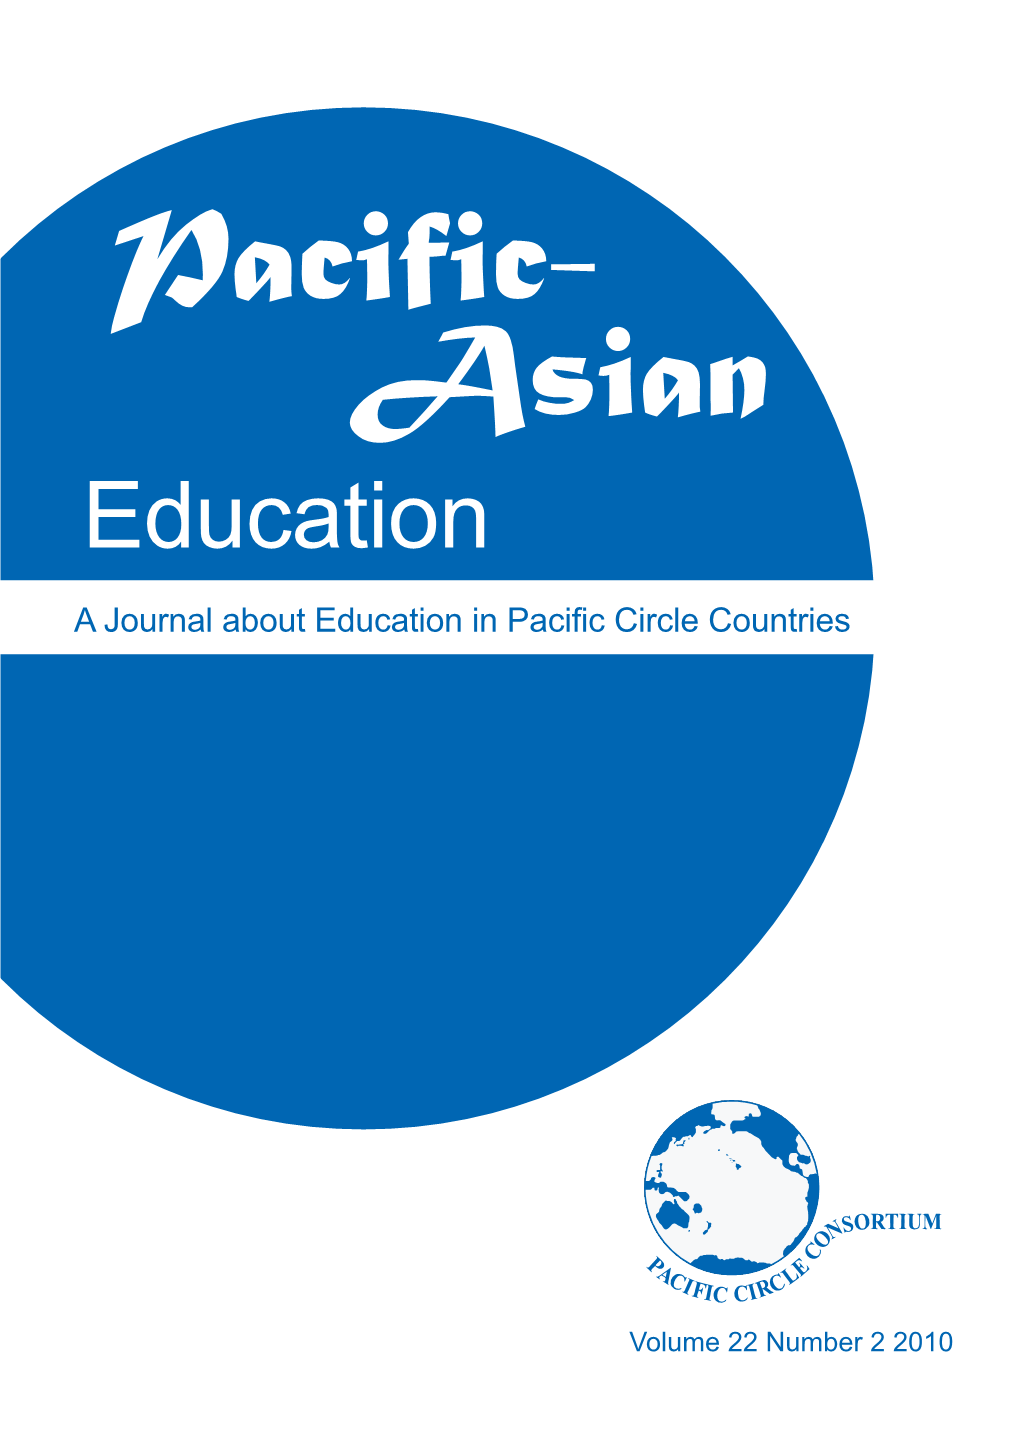 Pacific-Asian Education, Volume 22, Number 2